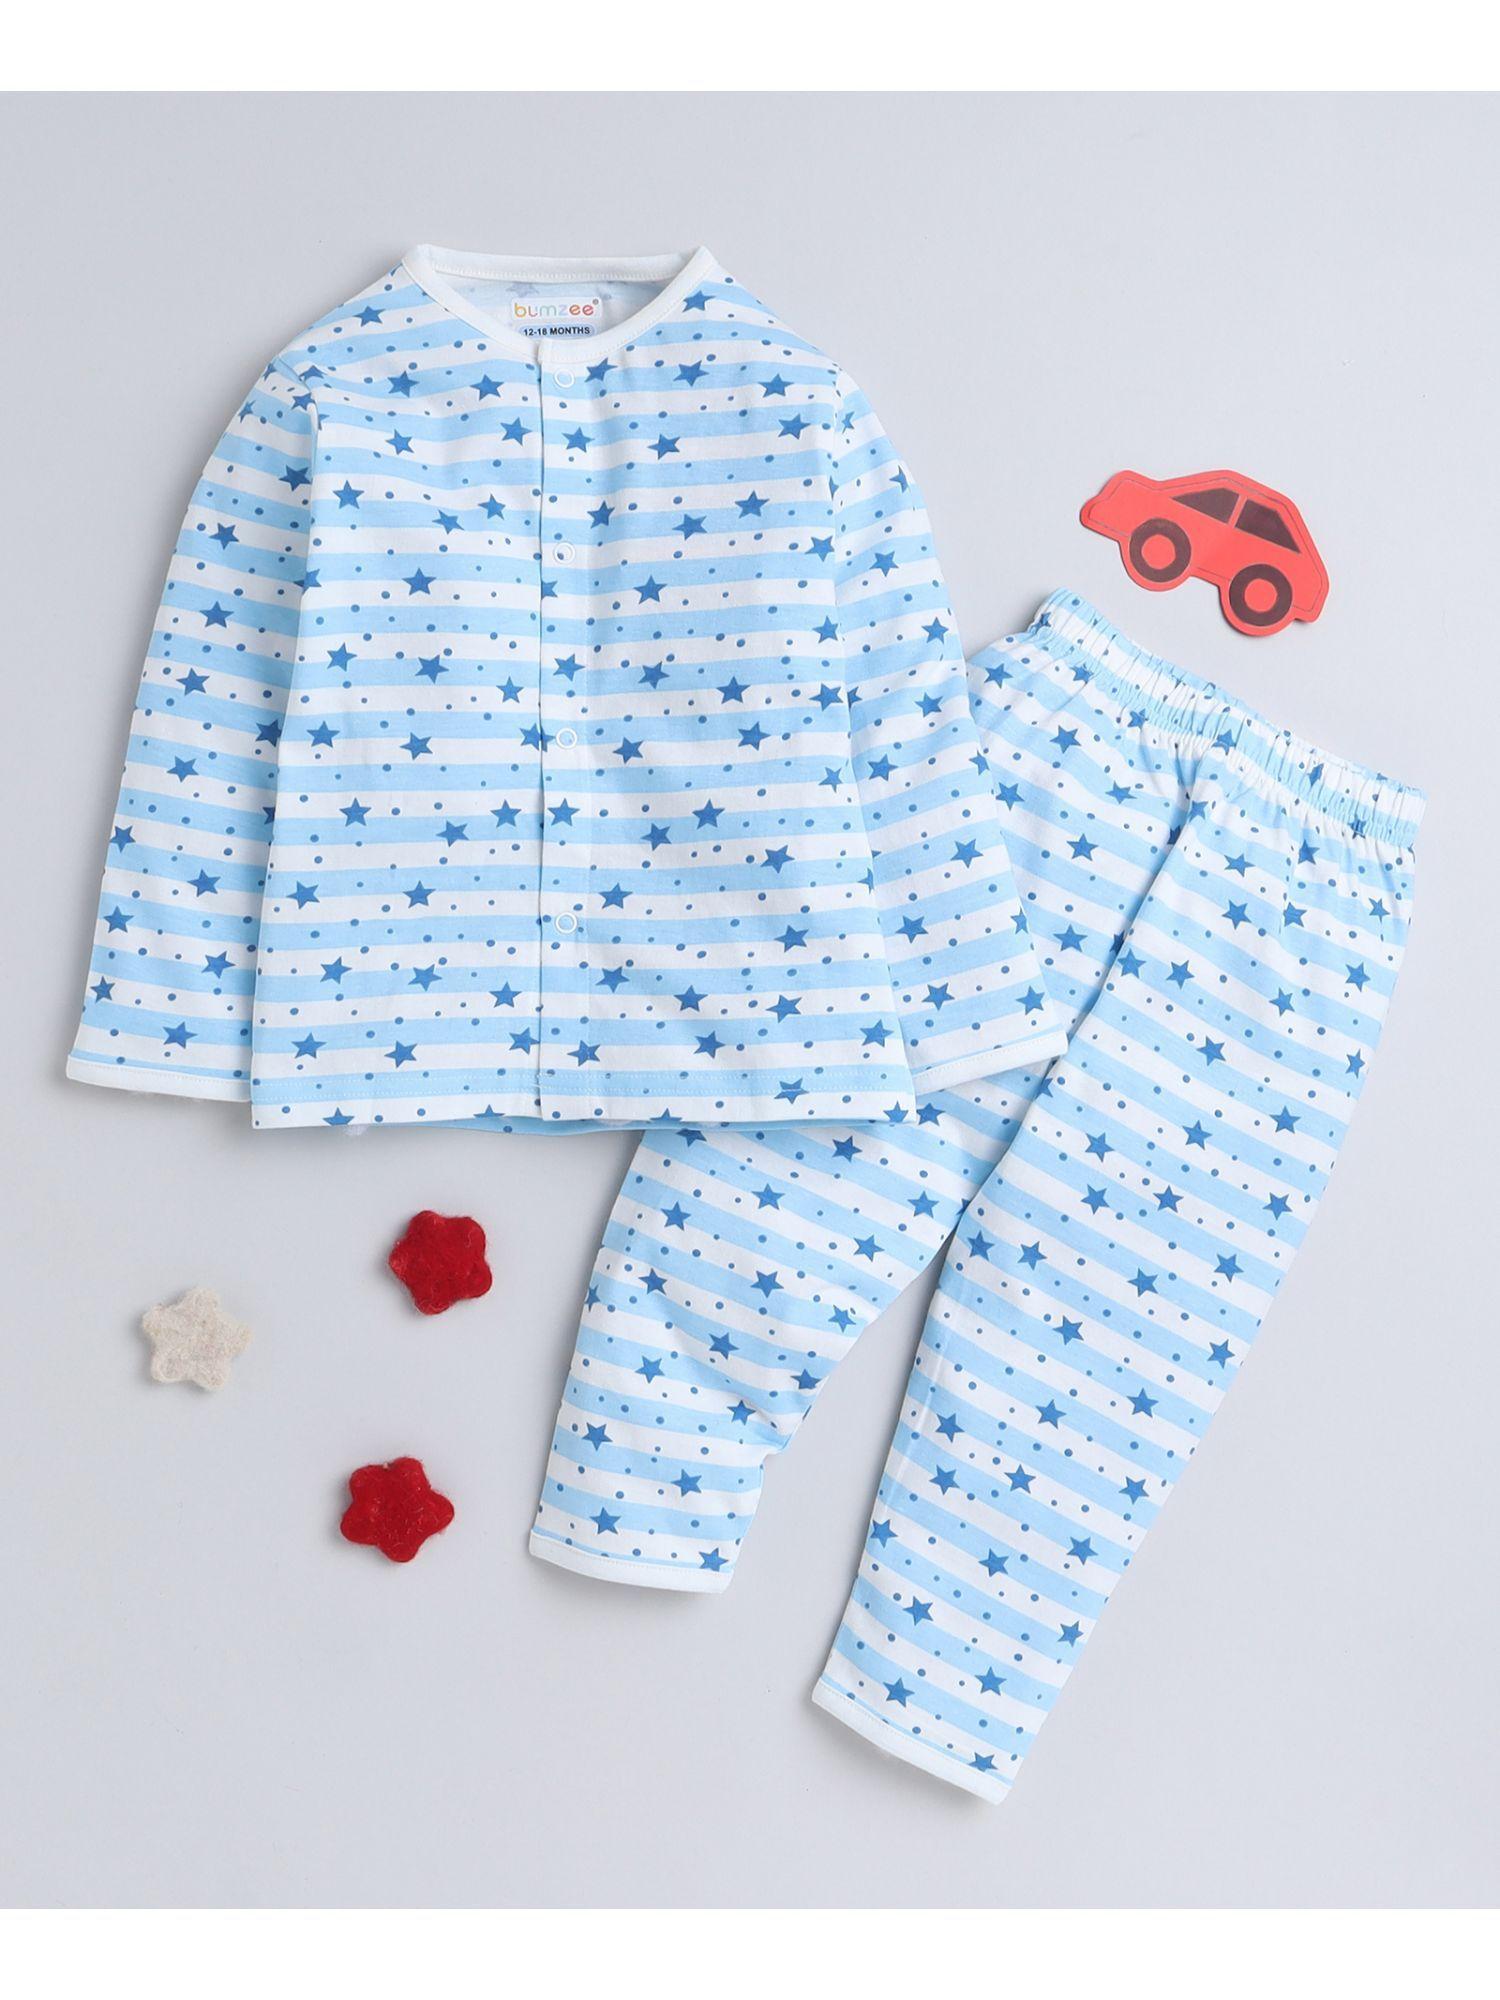 white and blue boys full sleeves cotton night suit (set of 2)